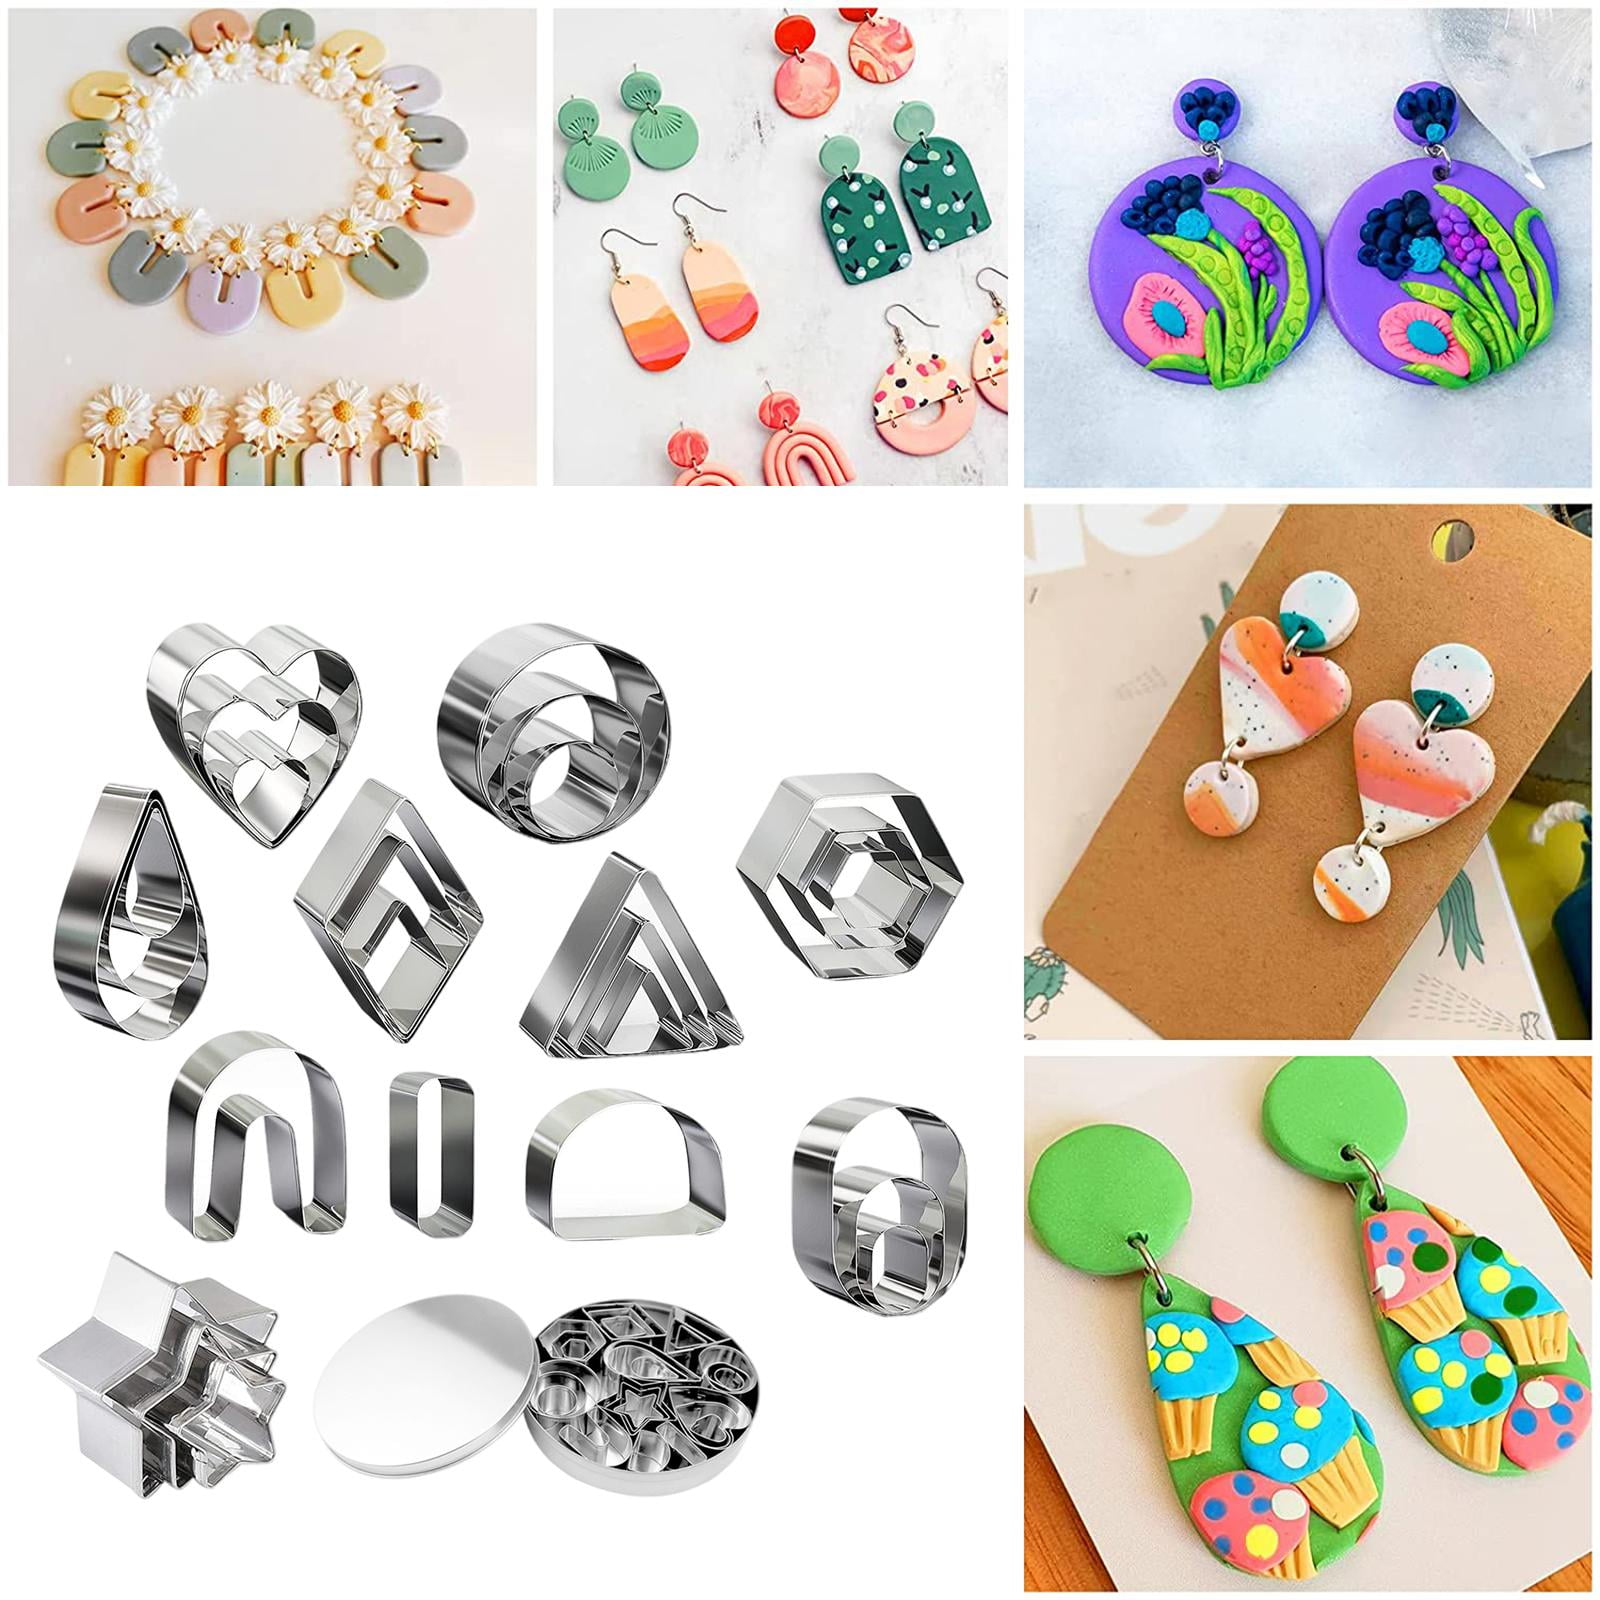 181pcs Soft Mould Polymer Clay Earring Making Kit With 18pcs Polymer Clay  Tools, 1pc Acrylic Panel, 1pc Acrylic Solid Stick, 8pcs Polymer Clay  Earring Punching Tools, 8pcs Different Sizes Circle Shaped Moulds